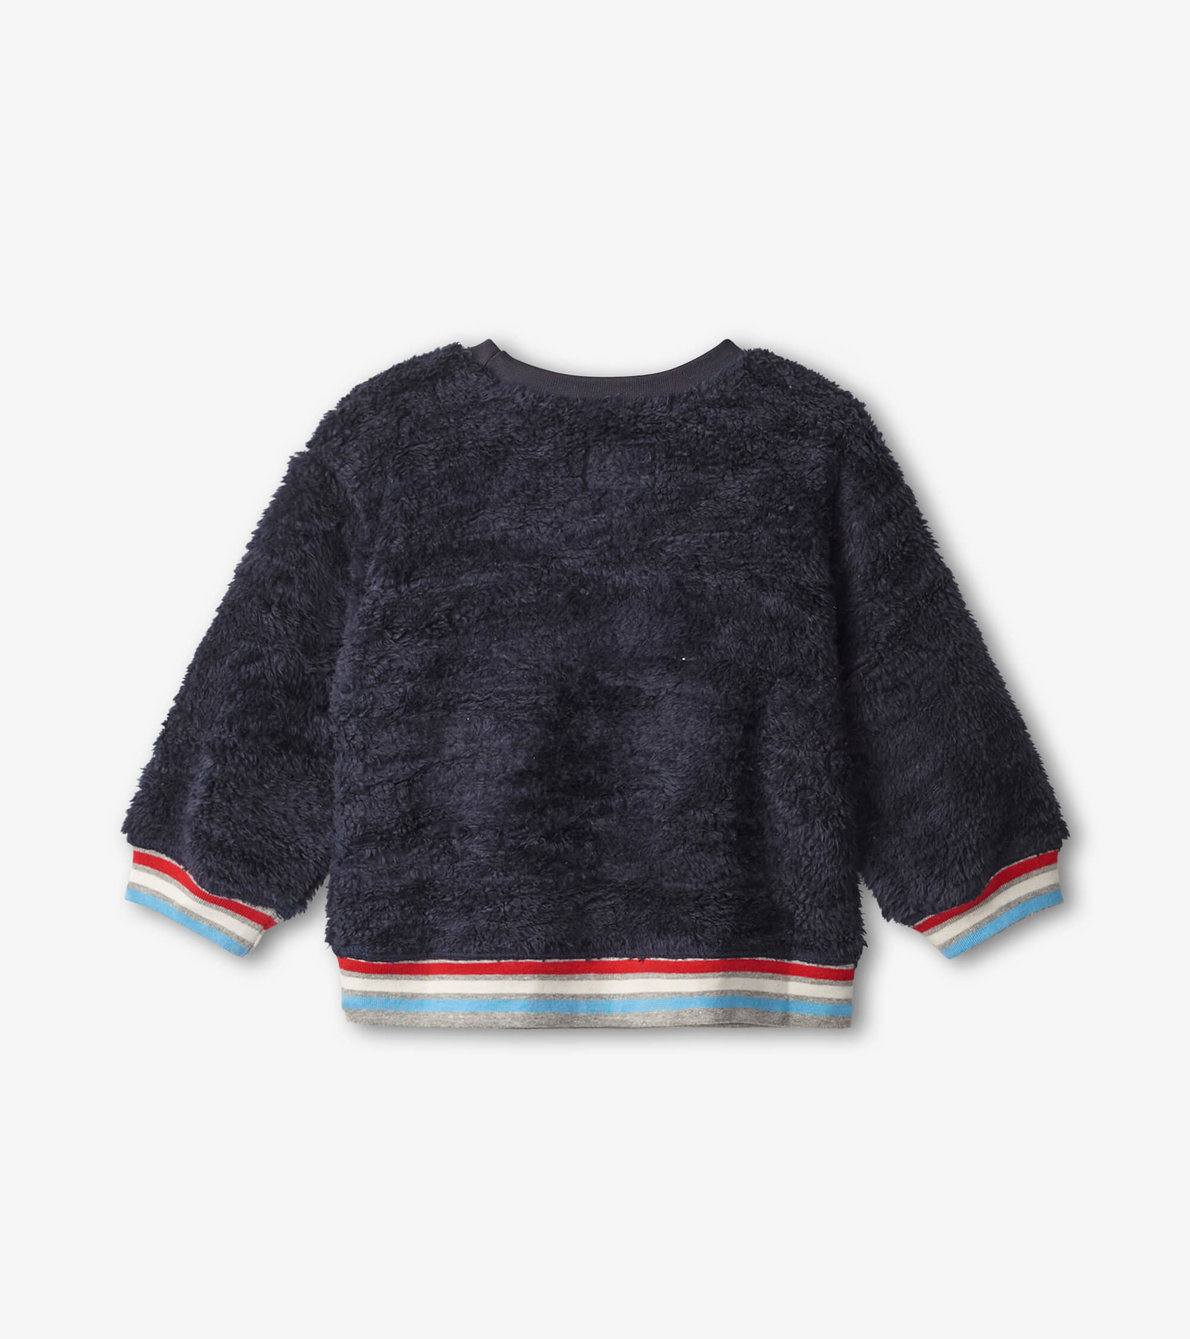 View larger image of Polar Bear Sherpa Fleece Baby Pull Over